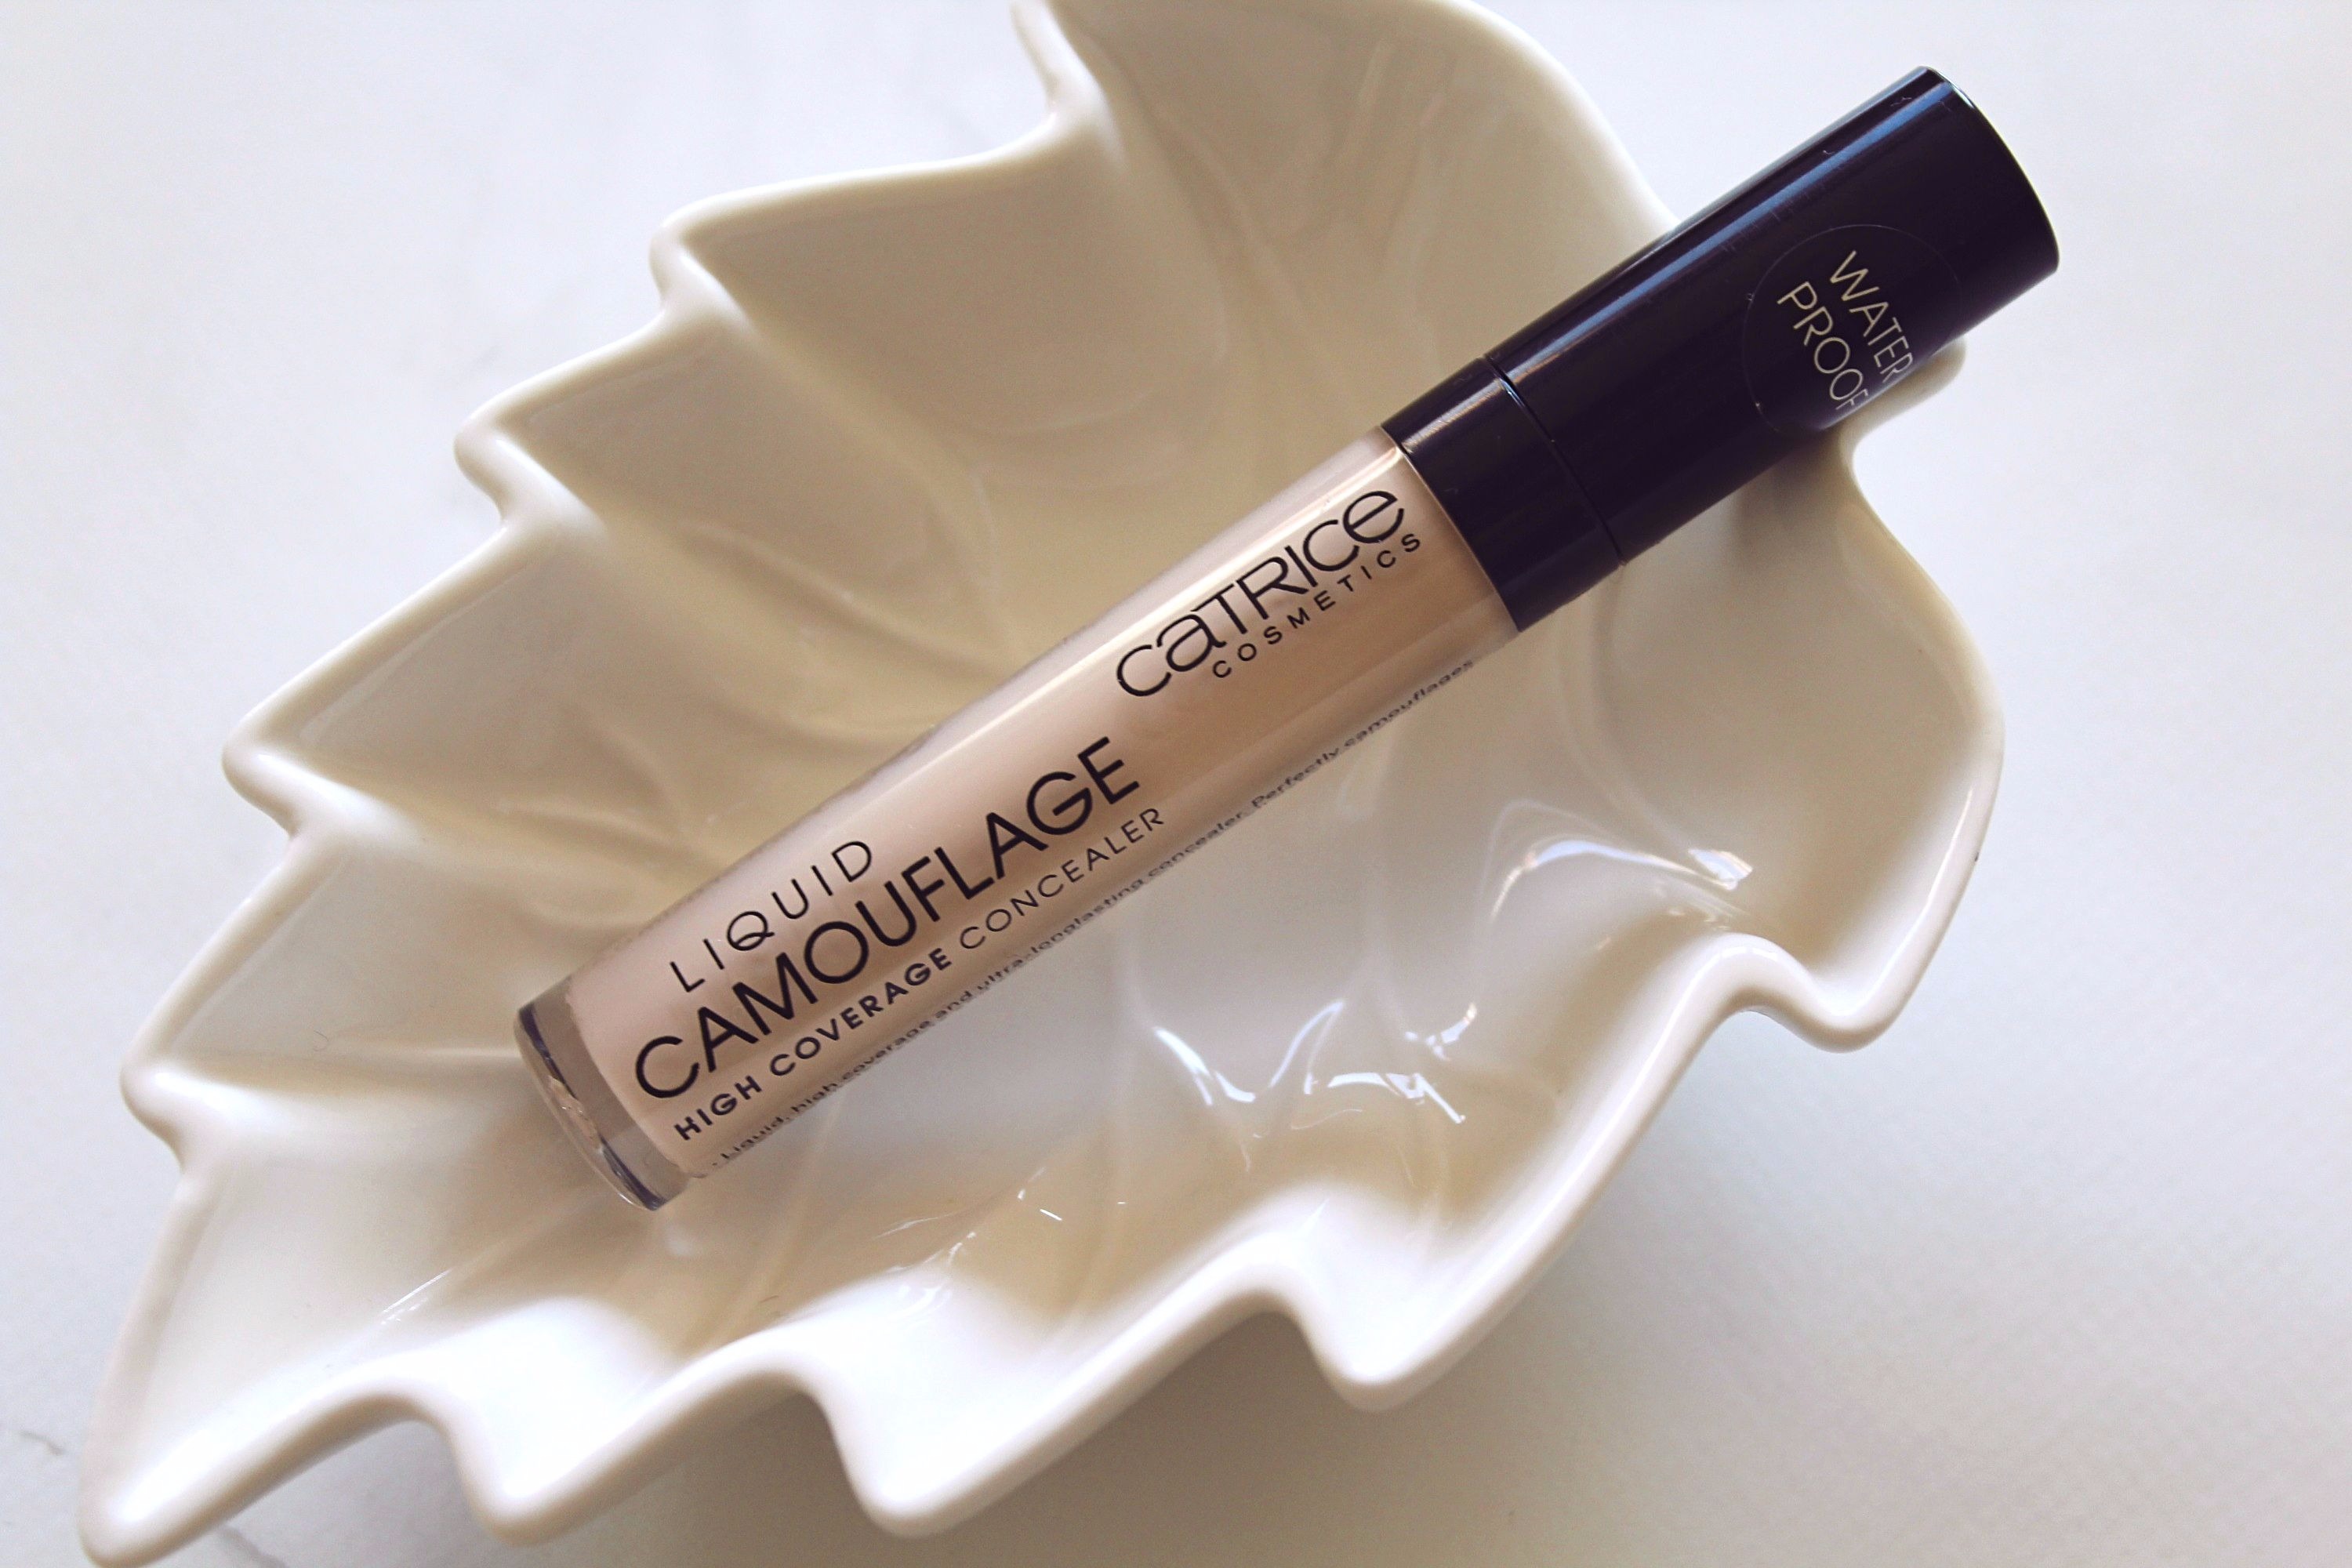 Catrice Liquid review/recenzija concealer camouflage – Simple high coverage Serenity